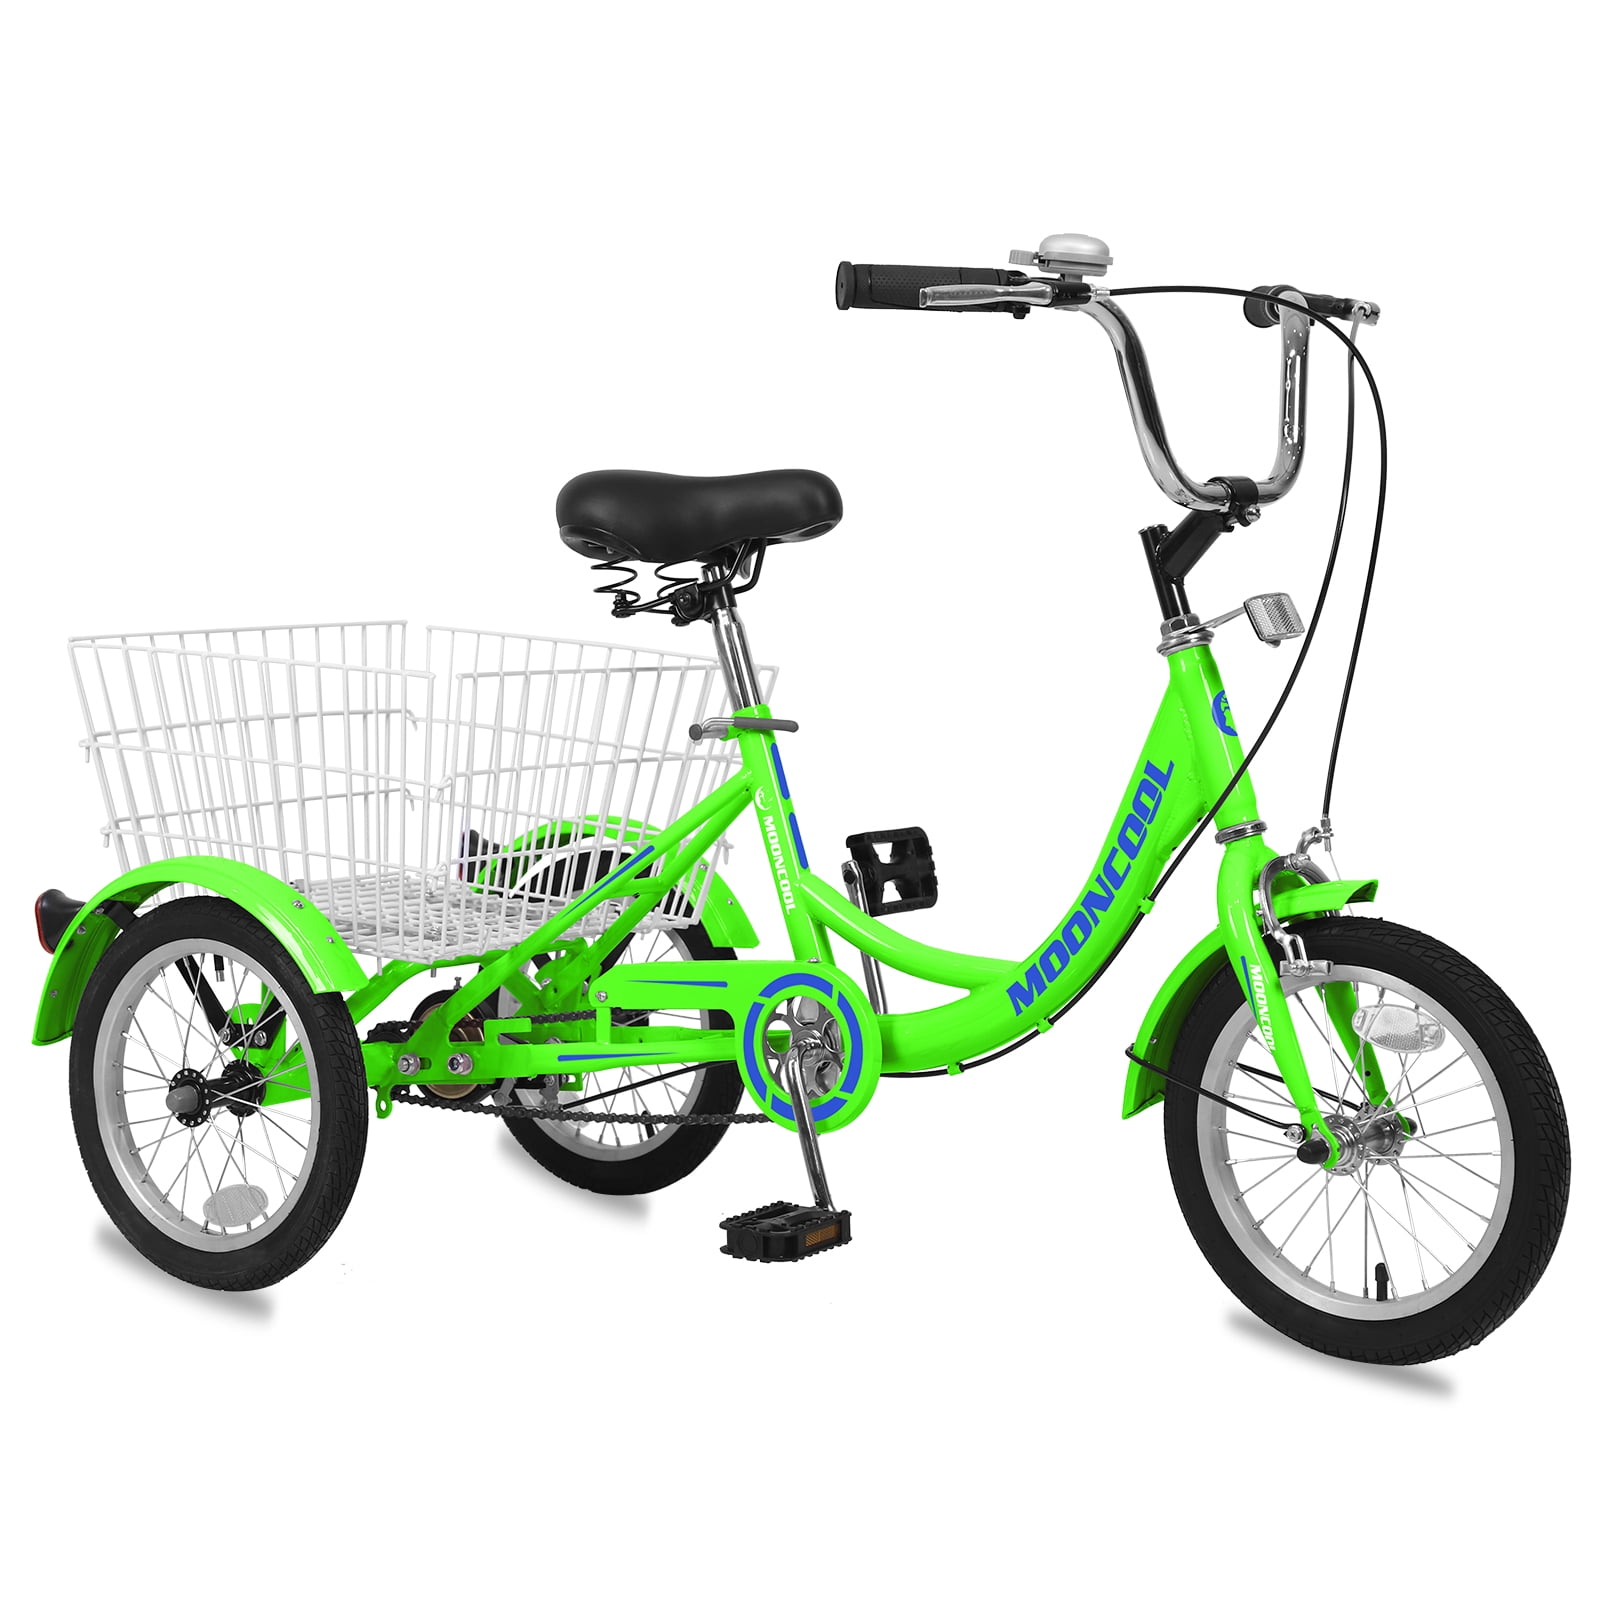 16 inch Unisex Teenager Tricycle 3 Wheel Bicycle Cruiser Bike with Large Basket 